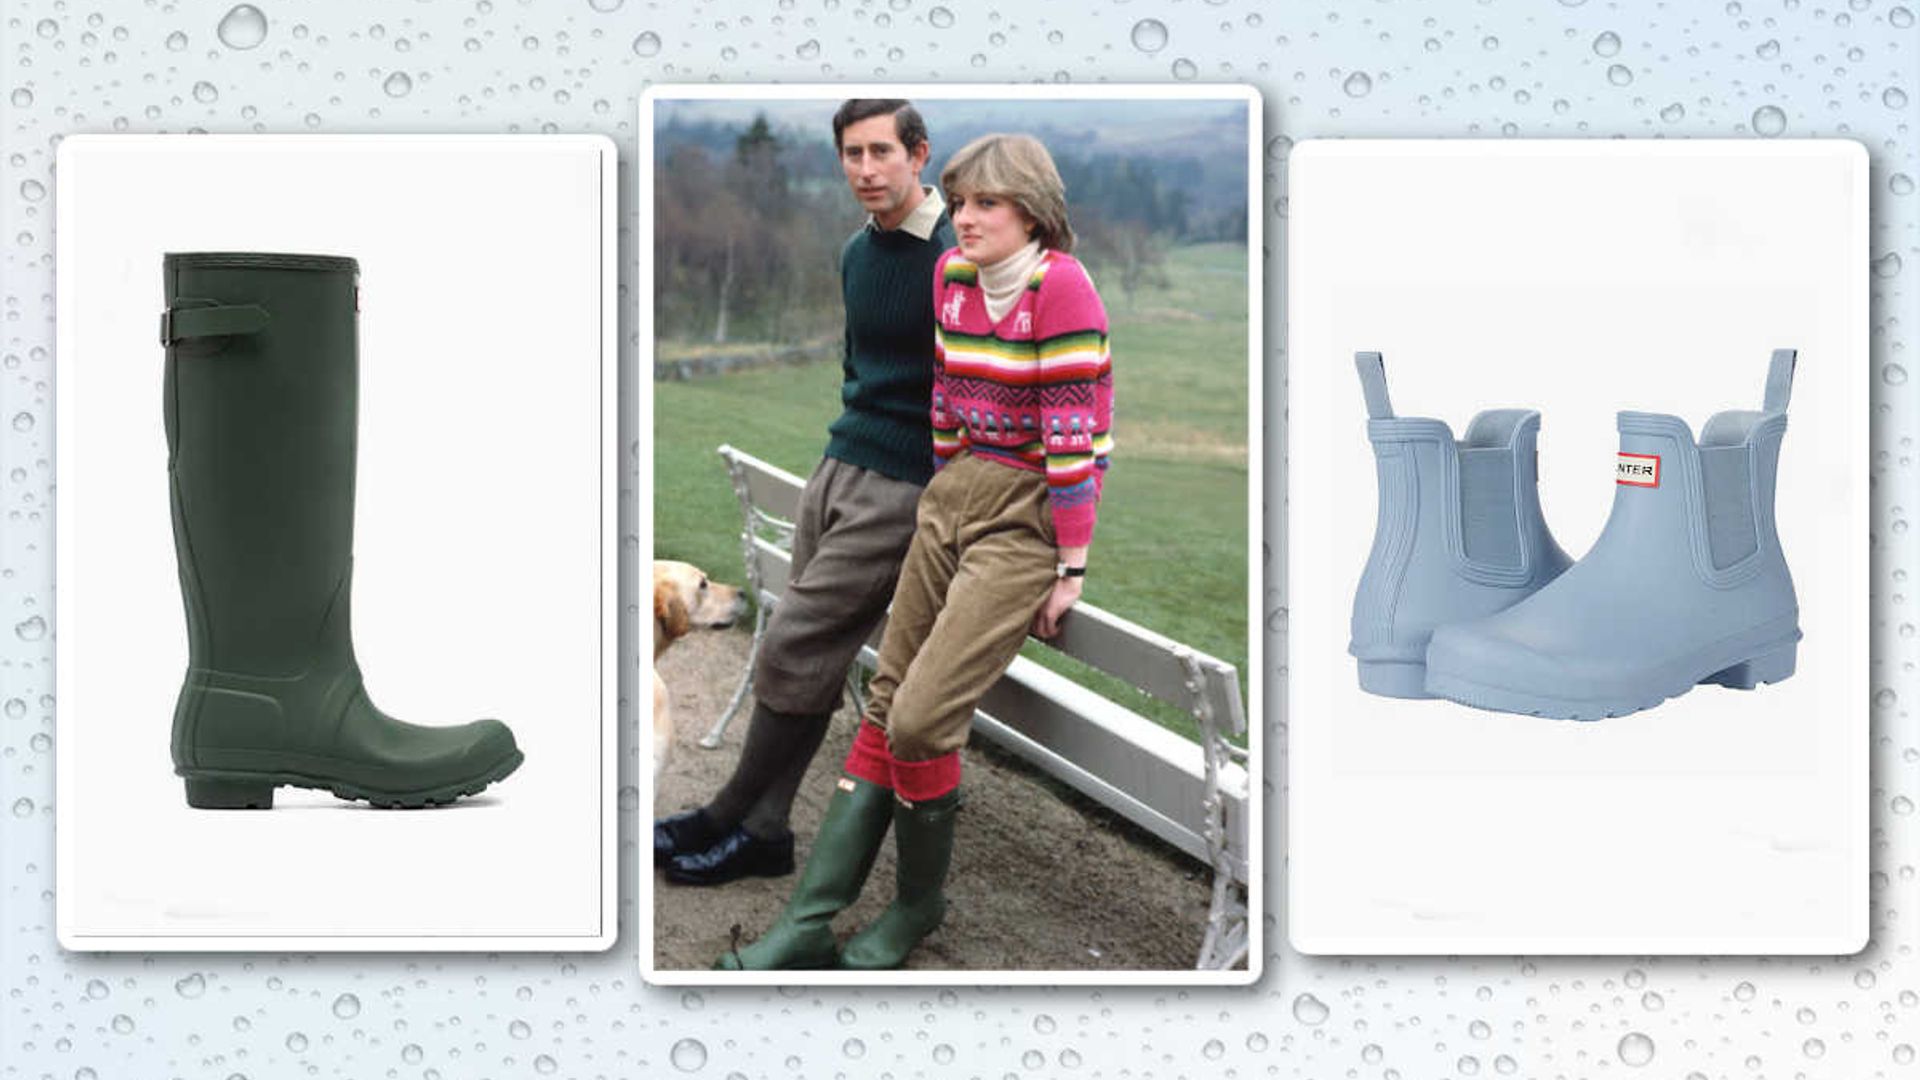 Princess Diana's Hunter wellies are on shop the best deals on the royal-loved rain boots | HELLO!